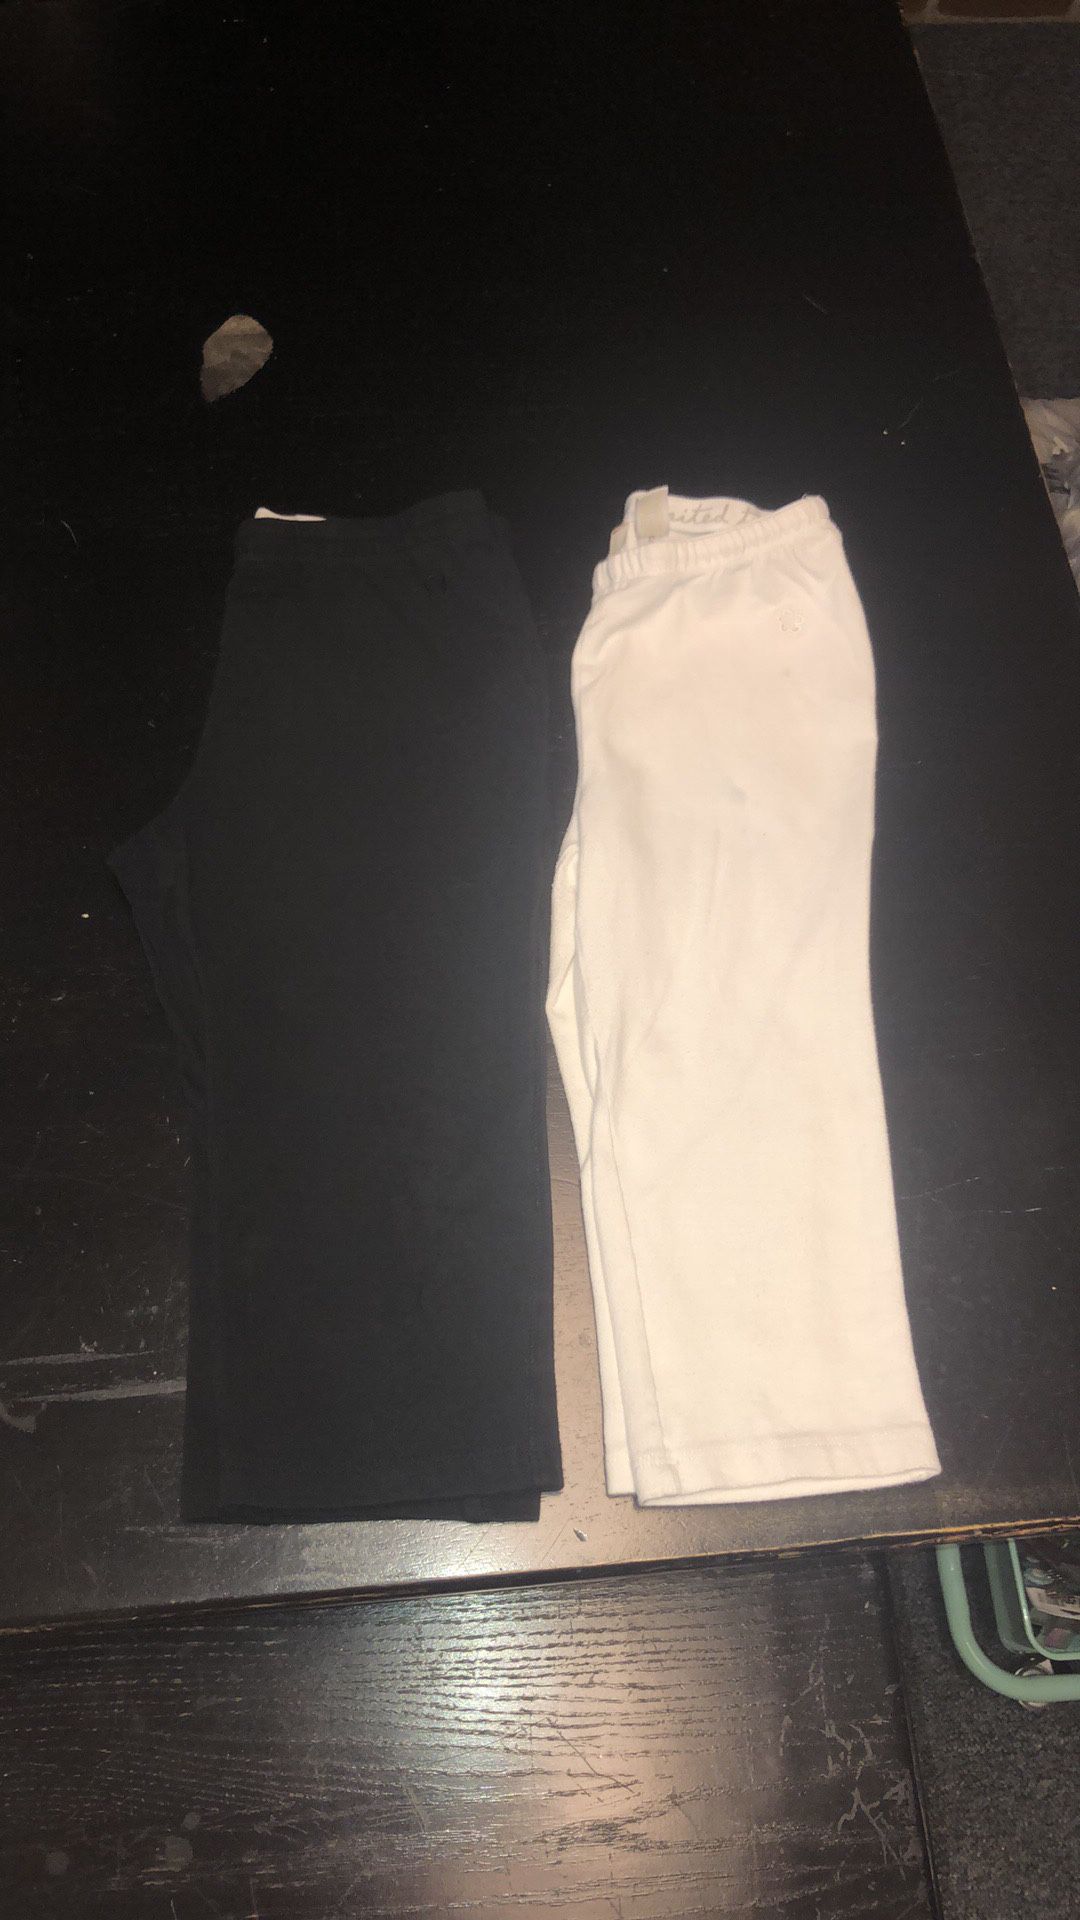 Kid’s size 14 Limited Too black & white capri leggings. The white ones have a few spots that may come out with bleach. I haven’t tried